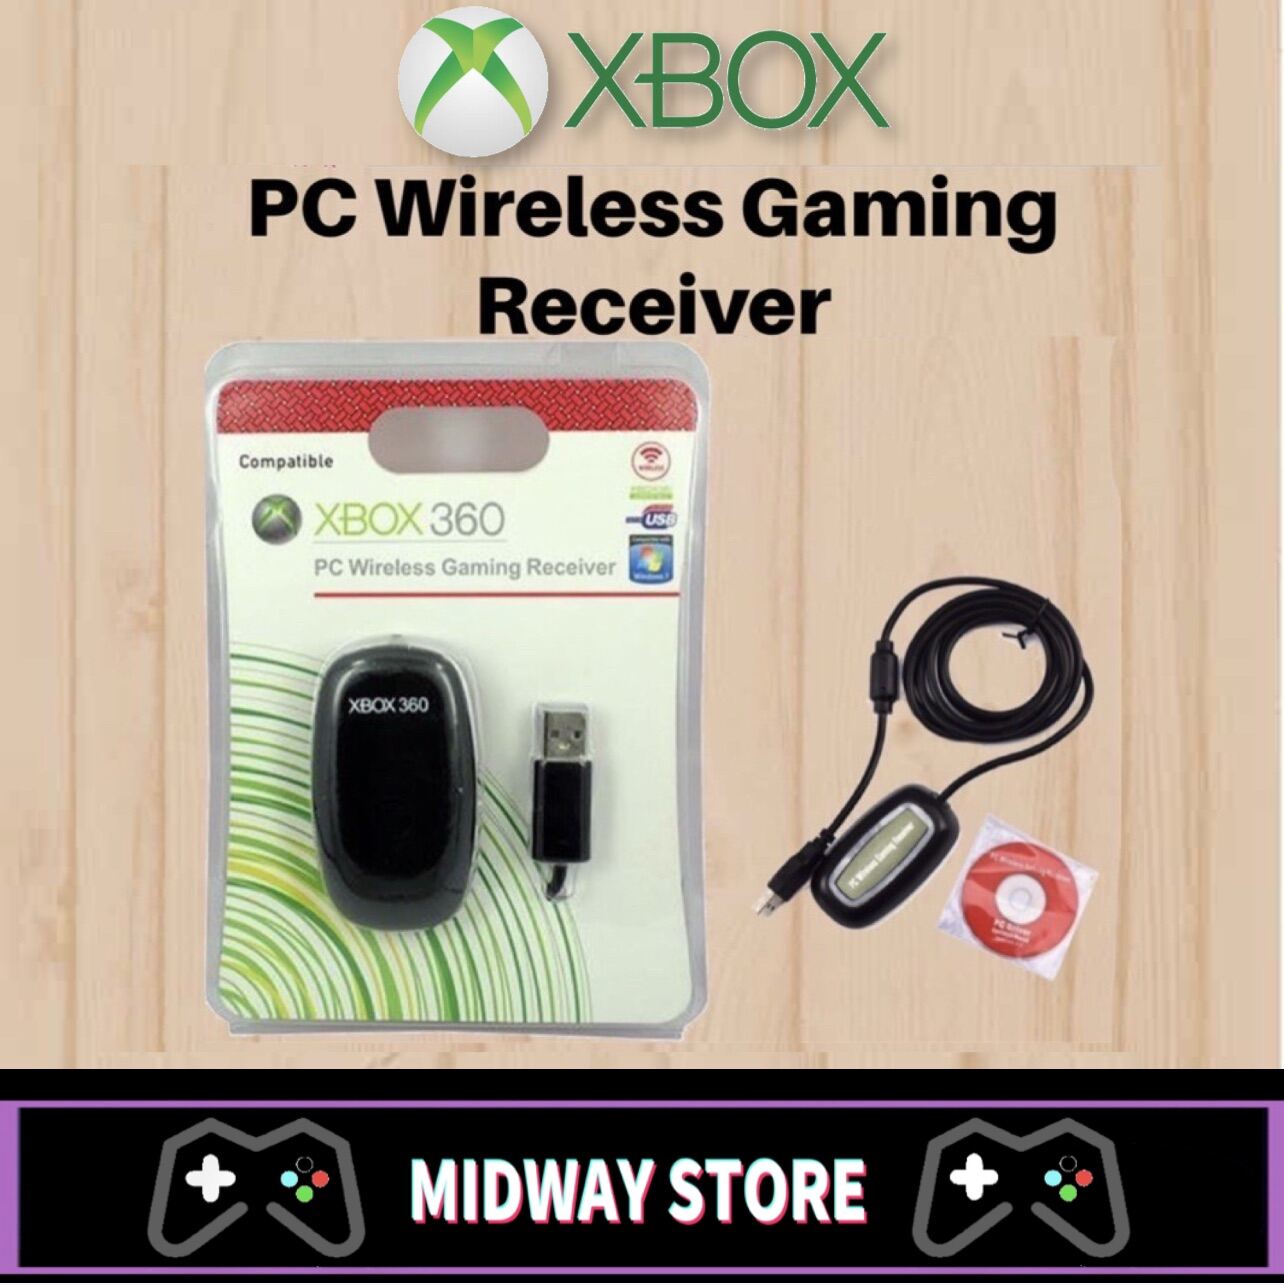 xbox 360 pc wireless gaming receiver software